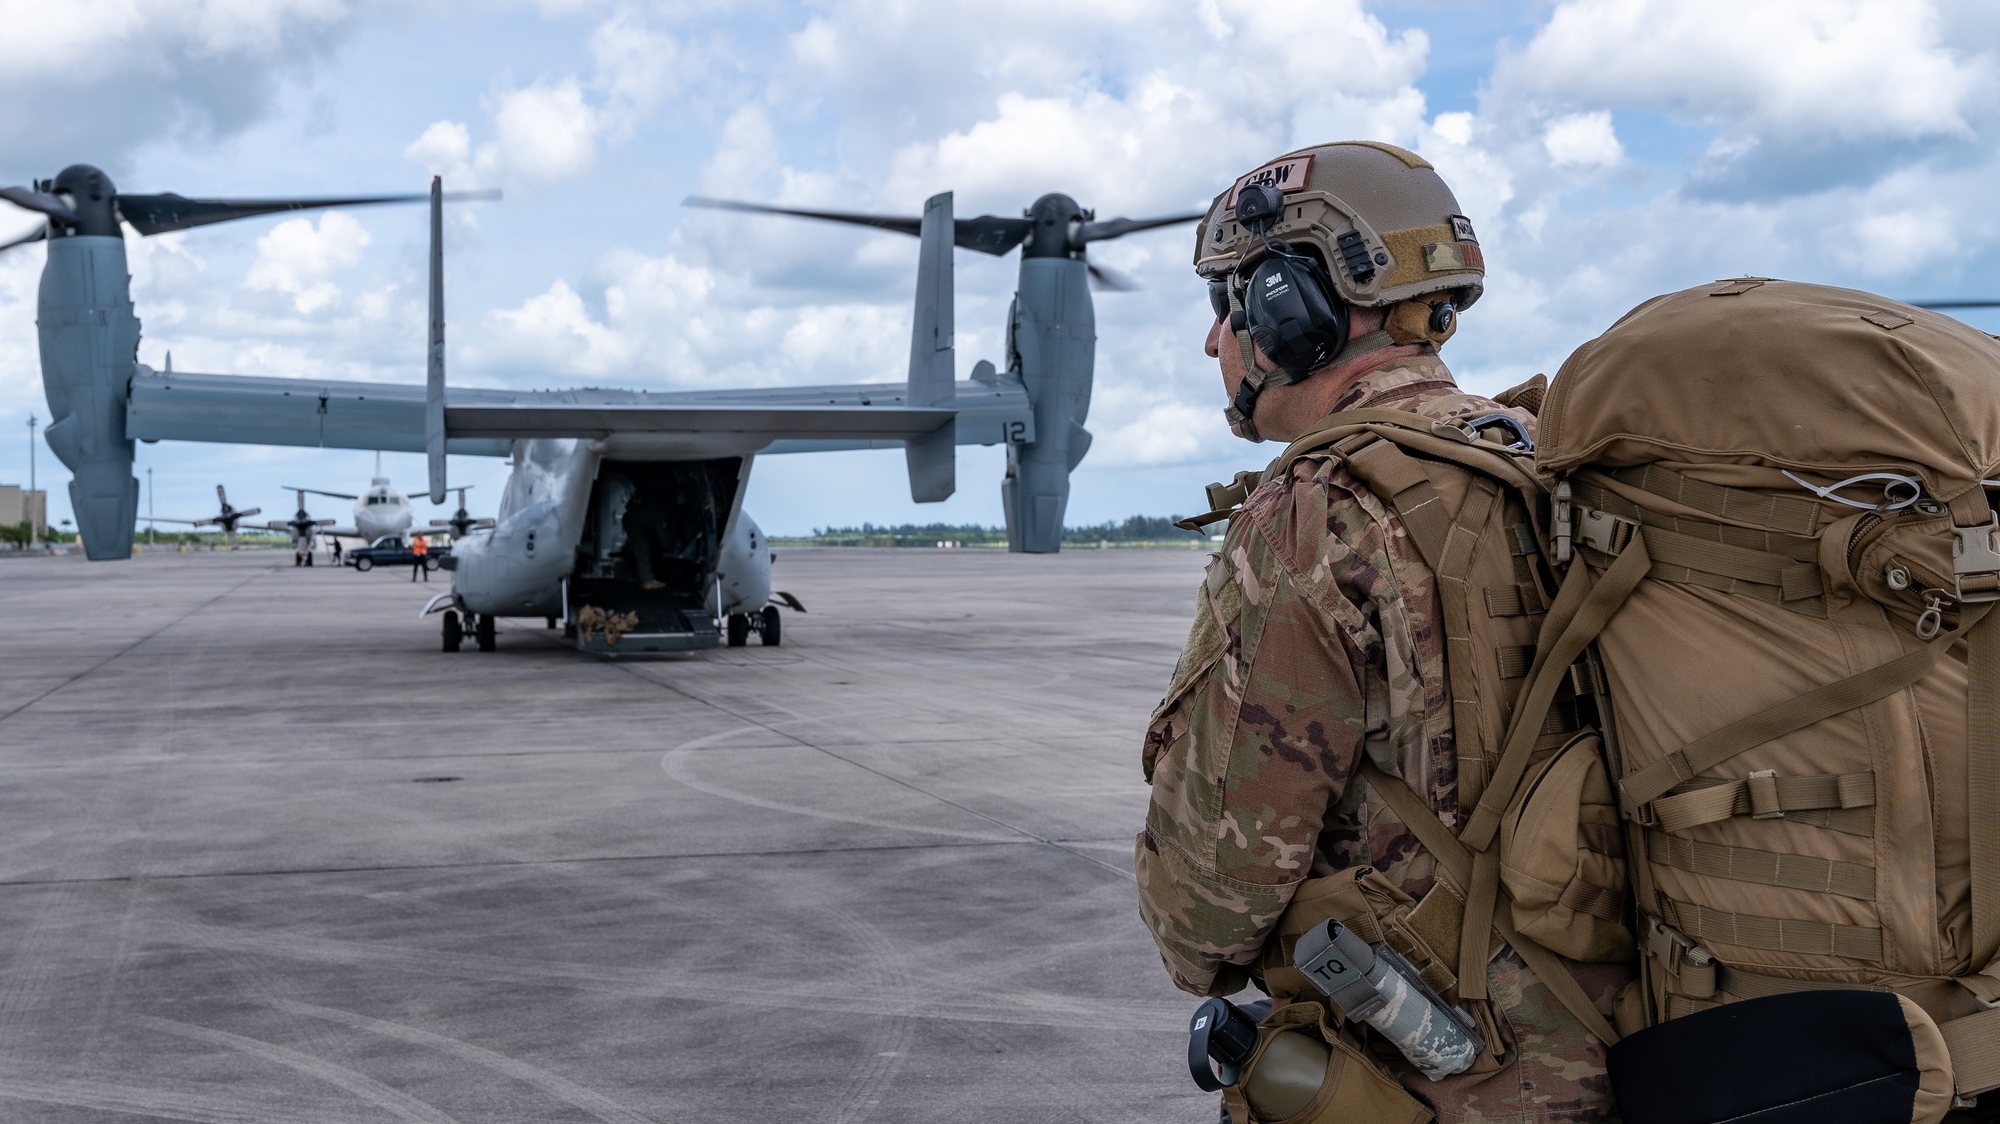 epa07818190 A handout photo made available by the Defense Visual Information Distribution Service shows shows an Airman from the US Air Force&#039;s Crisis Response Group preparing to board a Marine Corps MV-22 Osprey for disaster relief efforts in the Bahamas, at Homestead Air Reserve Base in Florida, USA 04 September 2019.  EPA/LIONEL CASTELLANO HANDOUT  HANDOUT EDITORIAL USE ONLY/NO SALES